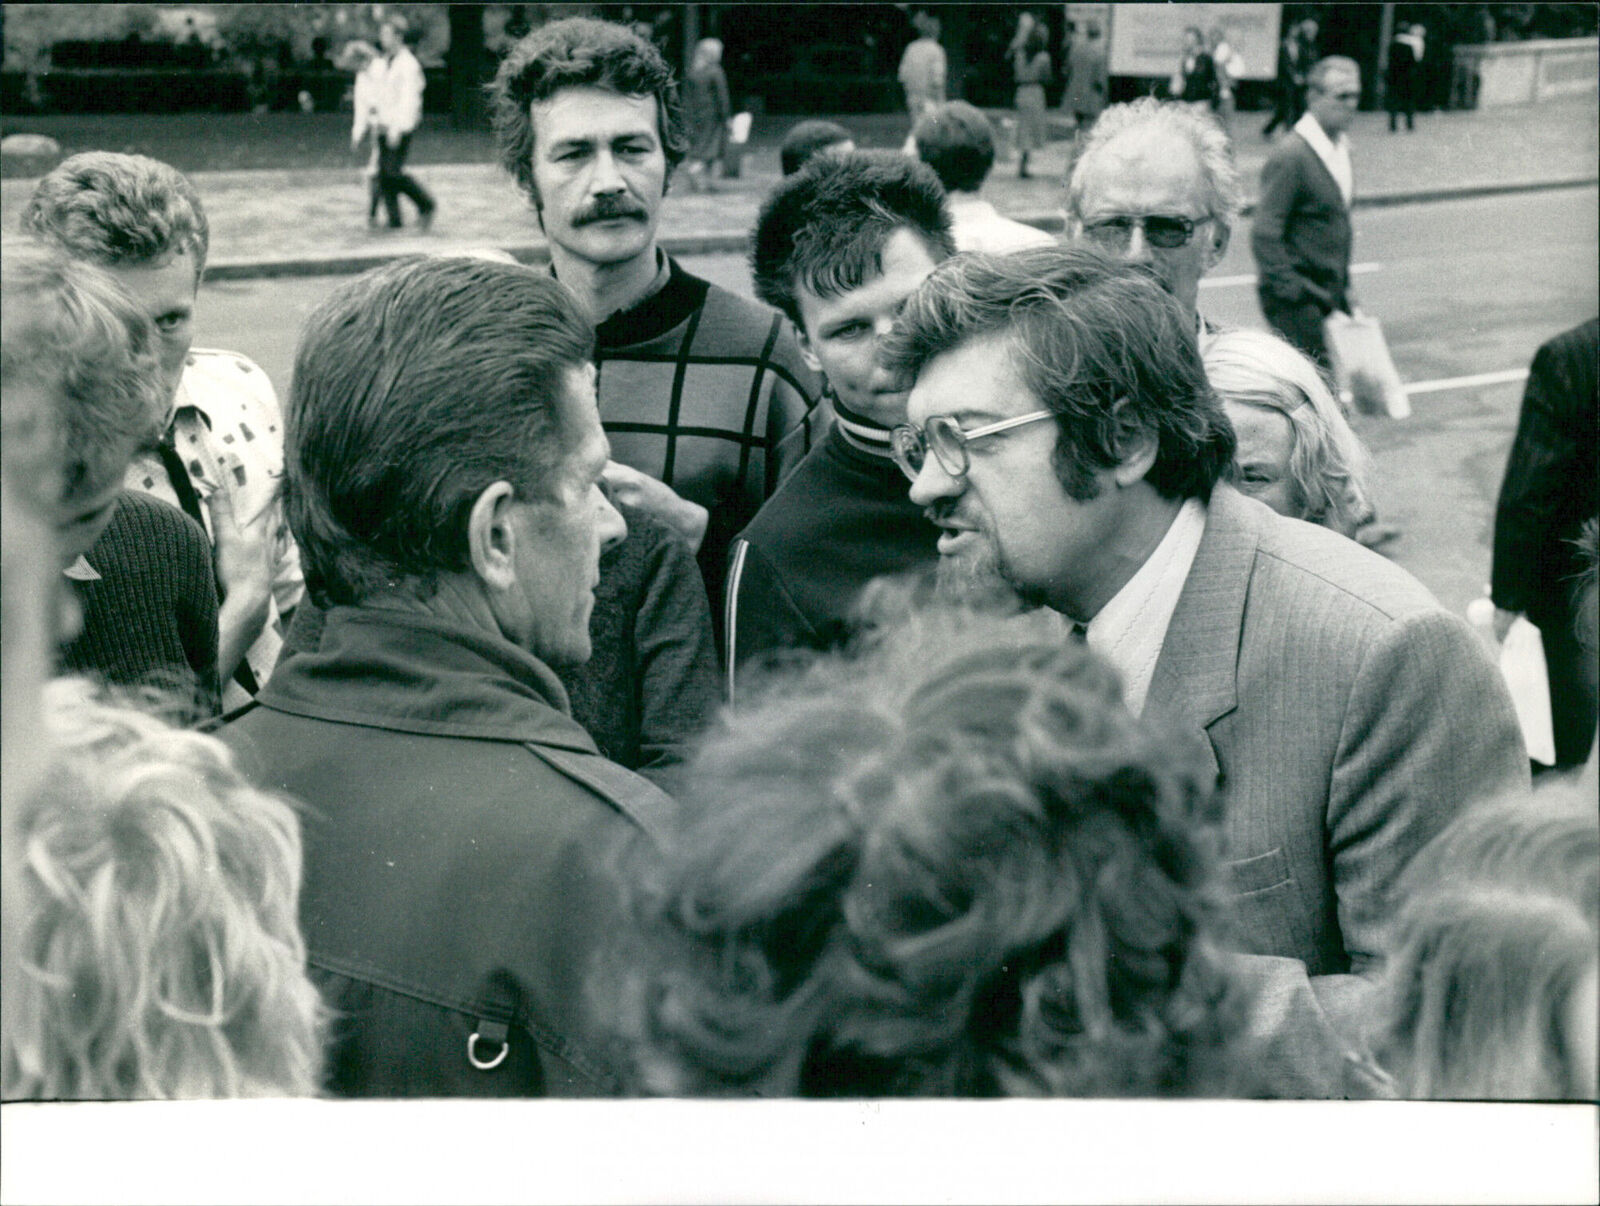 Discussions on the streets of Riga - Vintage Photograph 3197765